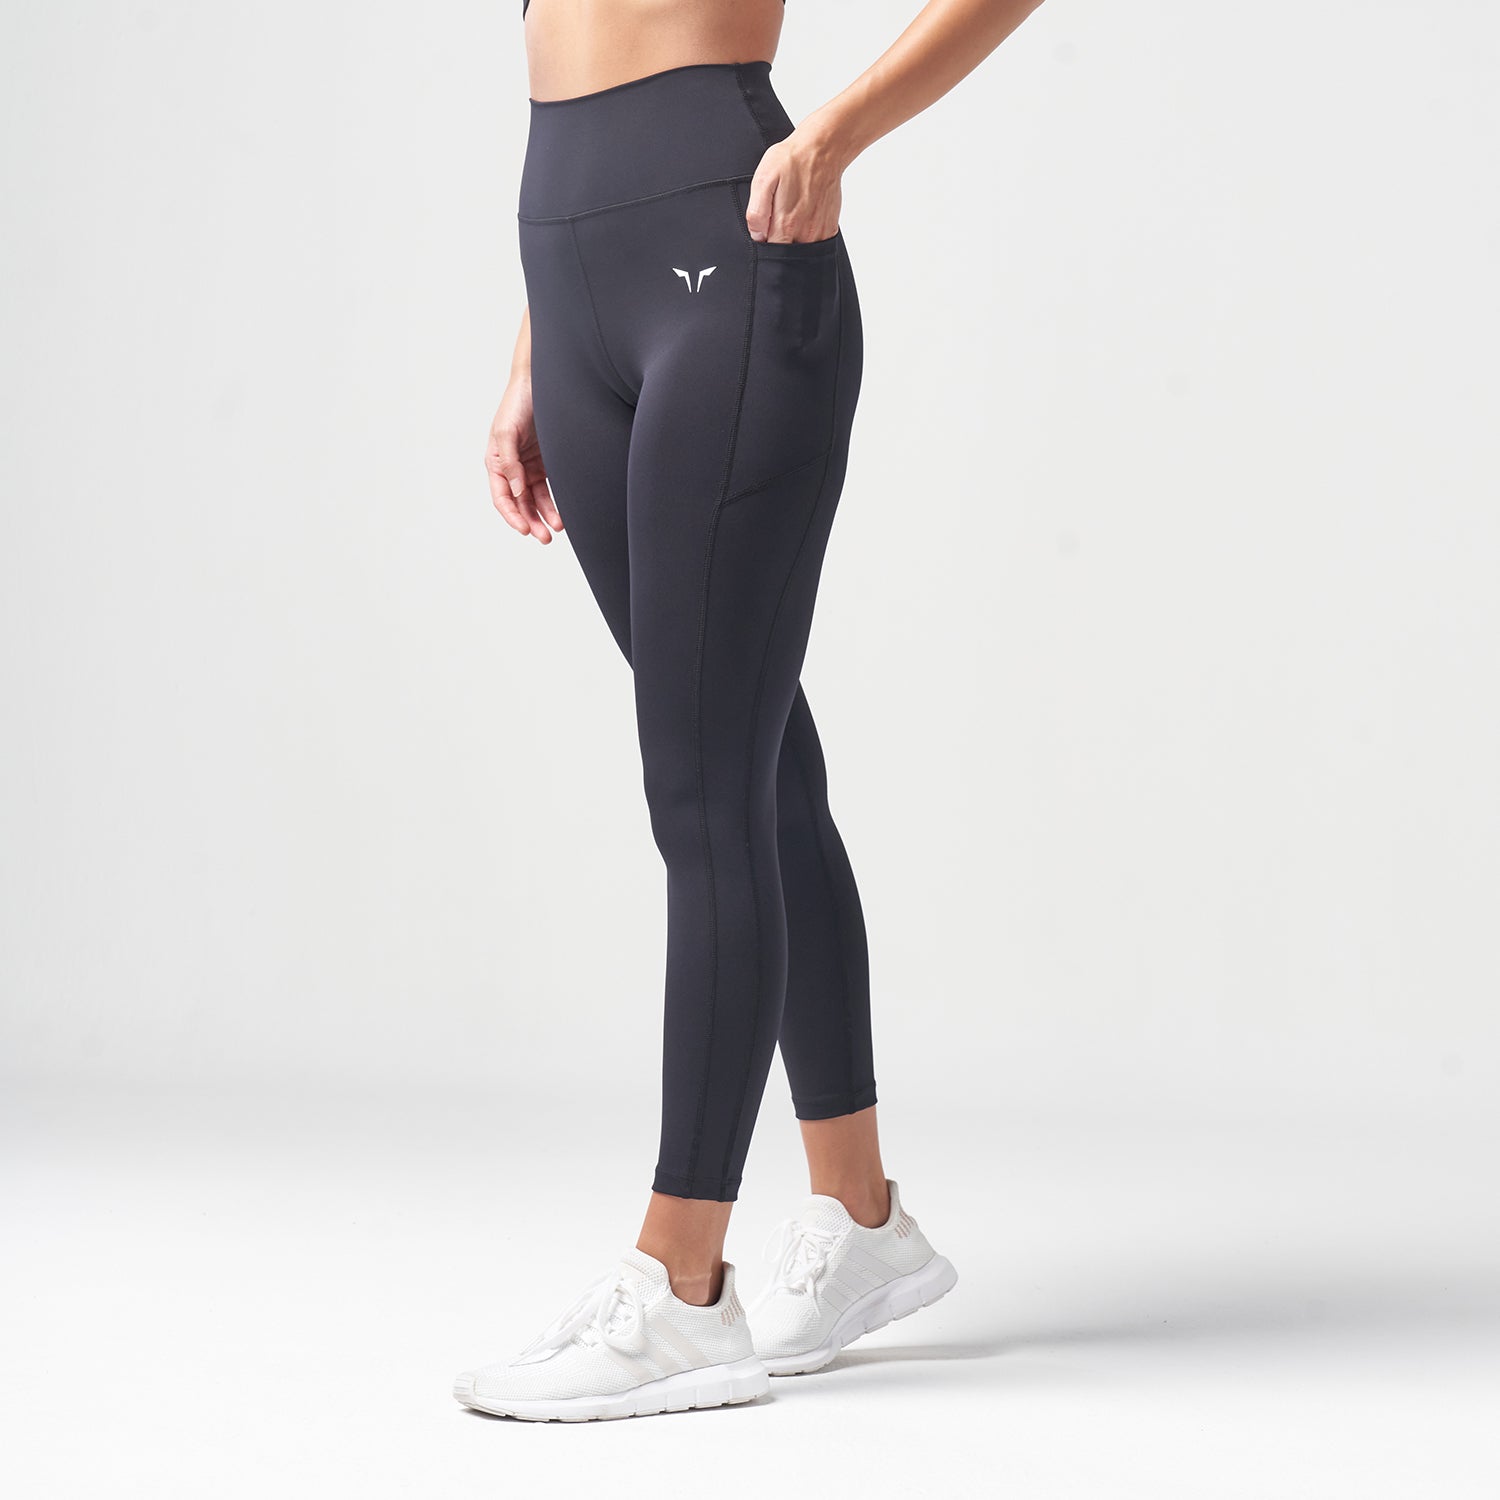 Walifrey Cropped Leggings for Women, High Waisted 3/4 Length Leggings for  Workout Gym Sports